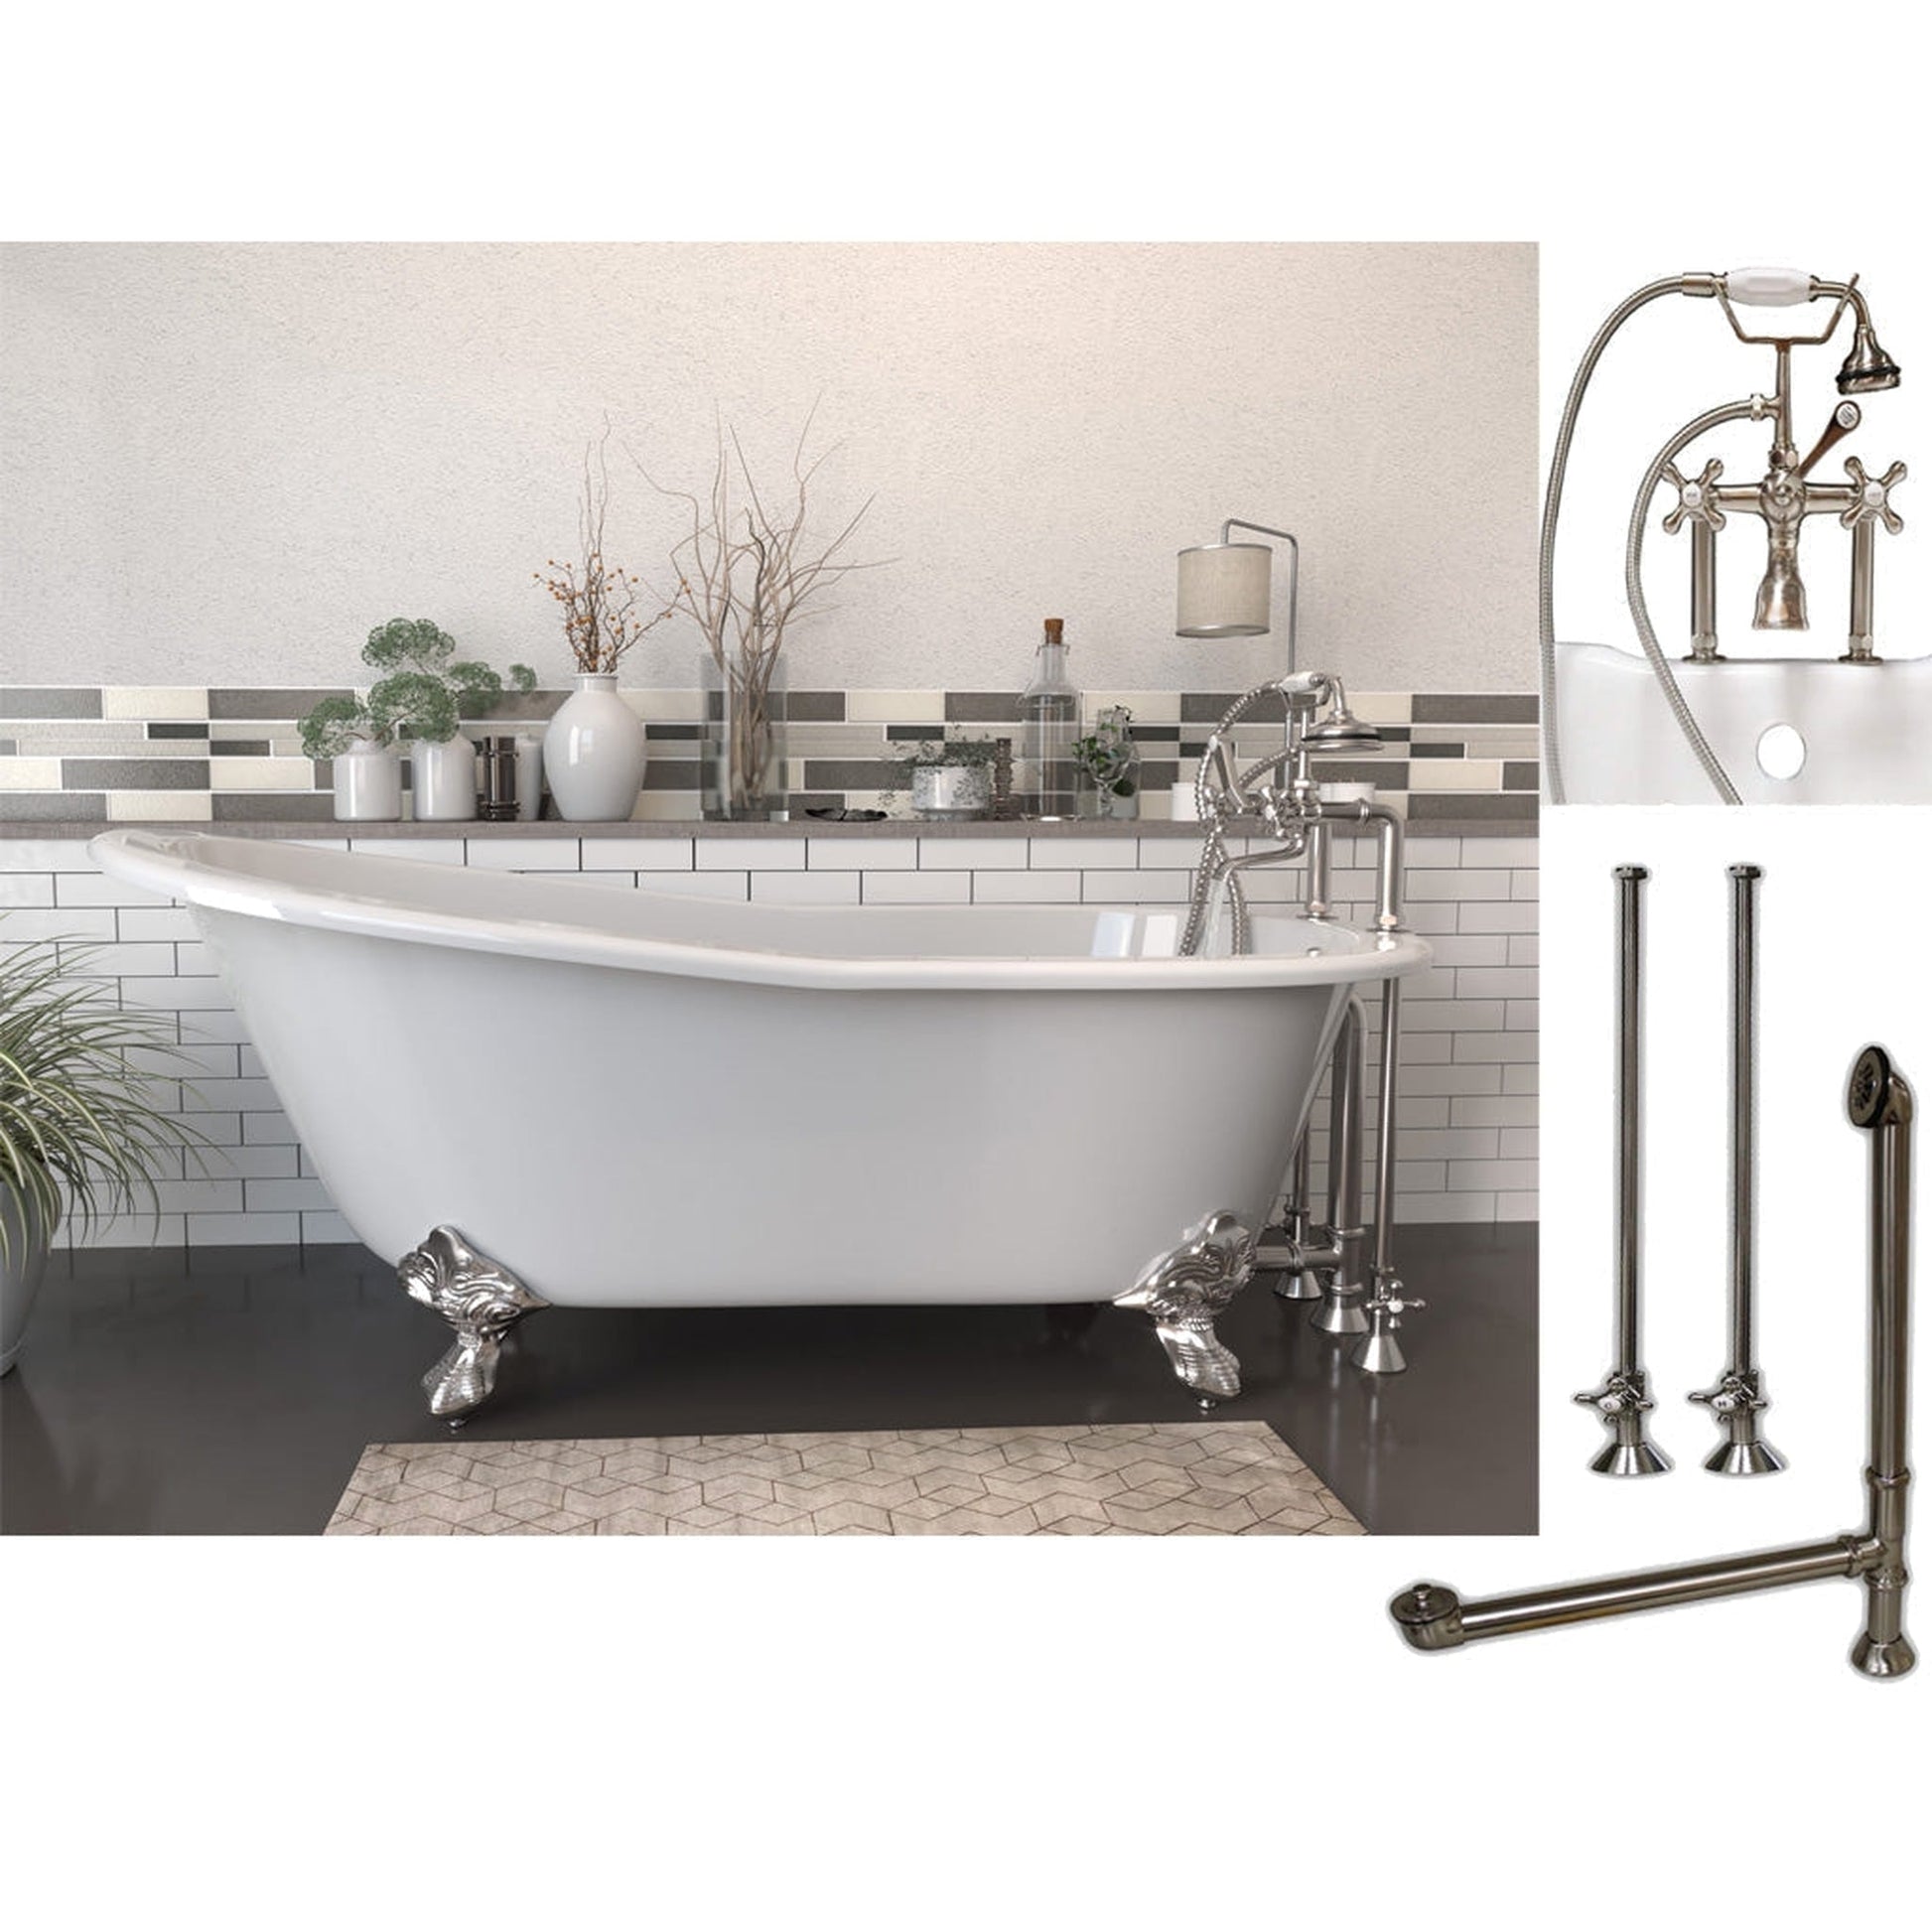 Cambridge Plumbing 67" White Cast Iron Clawfoot Bathtub With Deck Holes And Complete Plumbing Package Including 6” Riser Deck Mount Faucet, Supply Lines, Drain And Overflow Assembly In Brushed Nickel